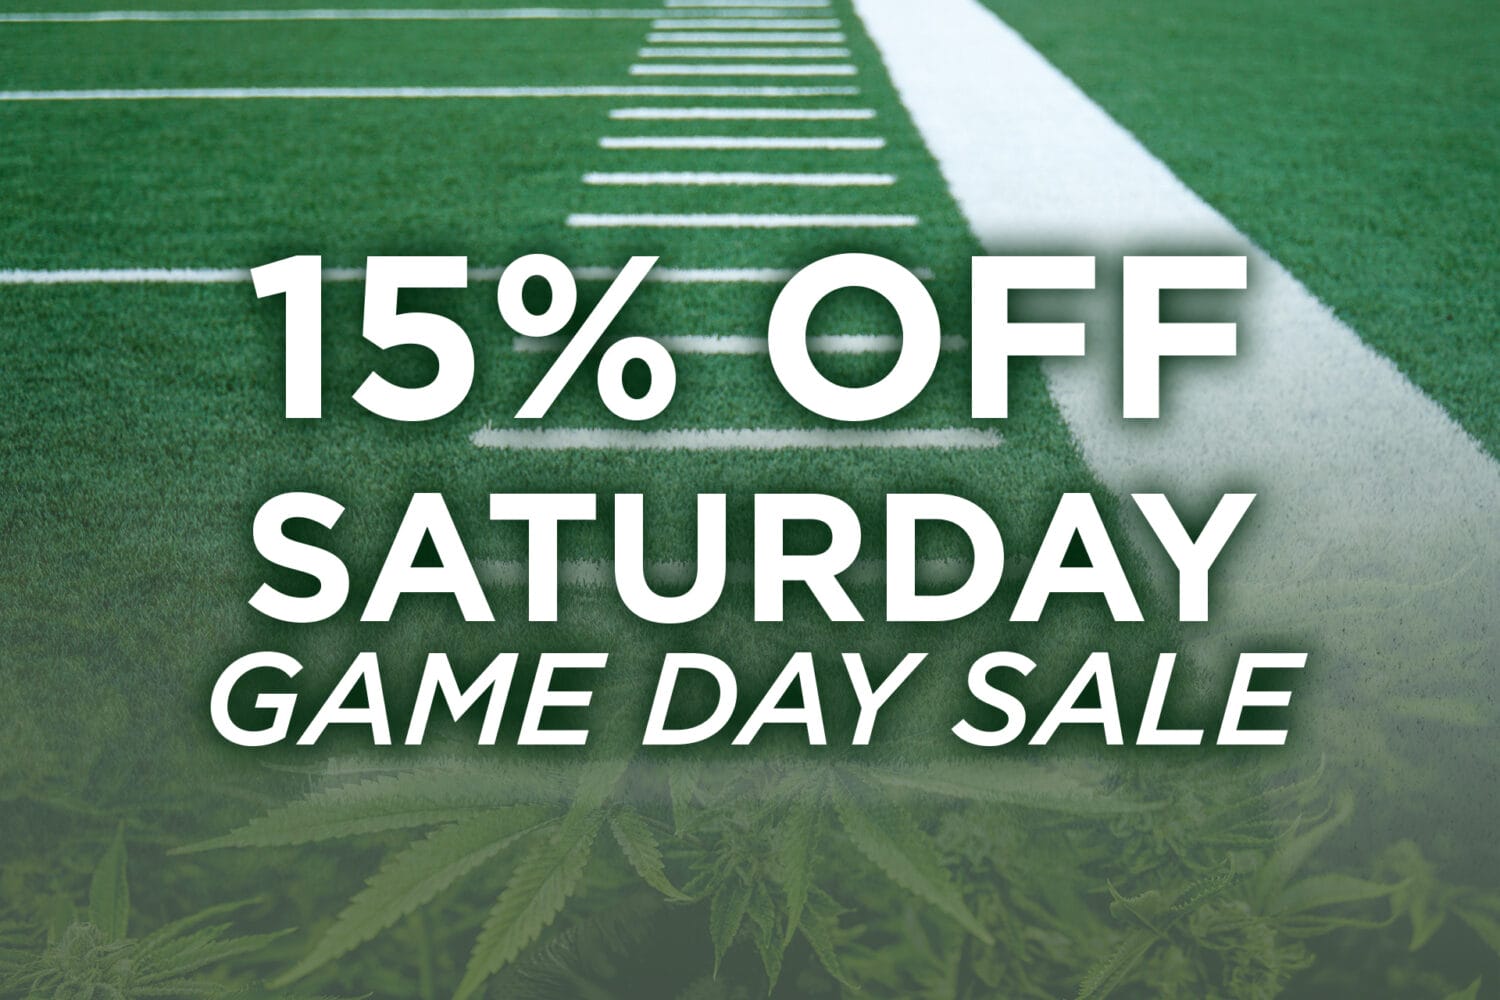 Game Day Sale 1-16